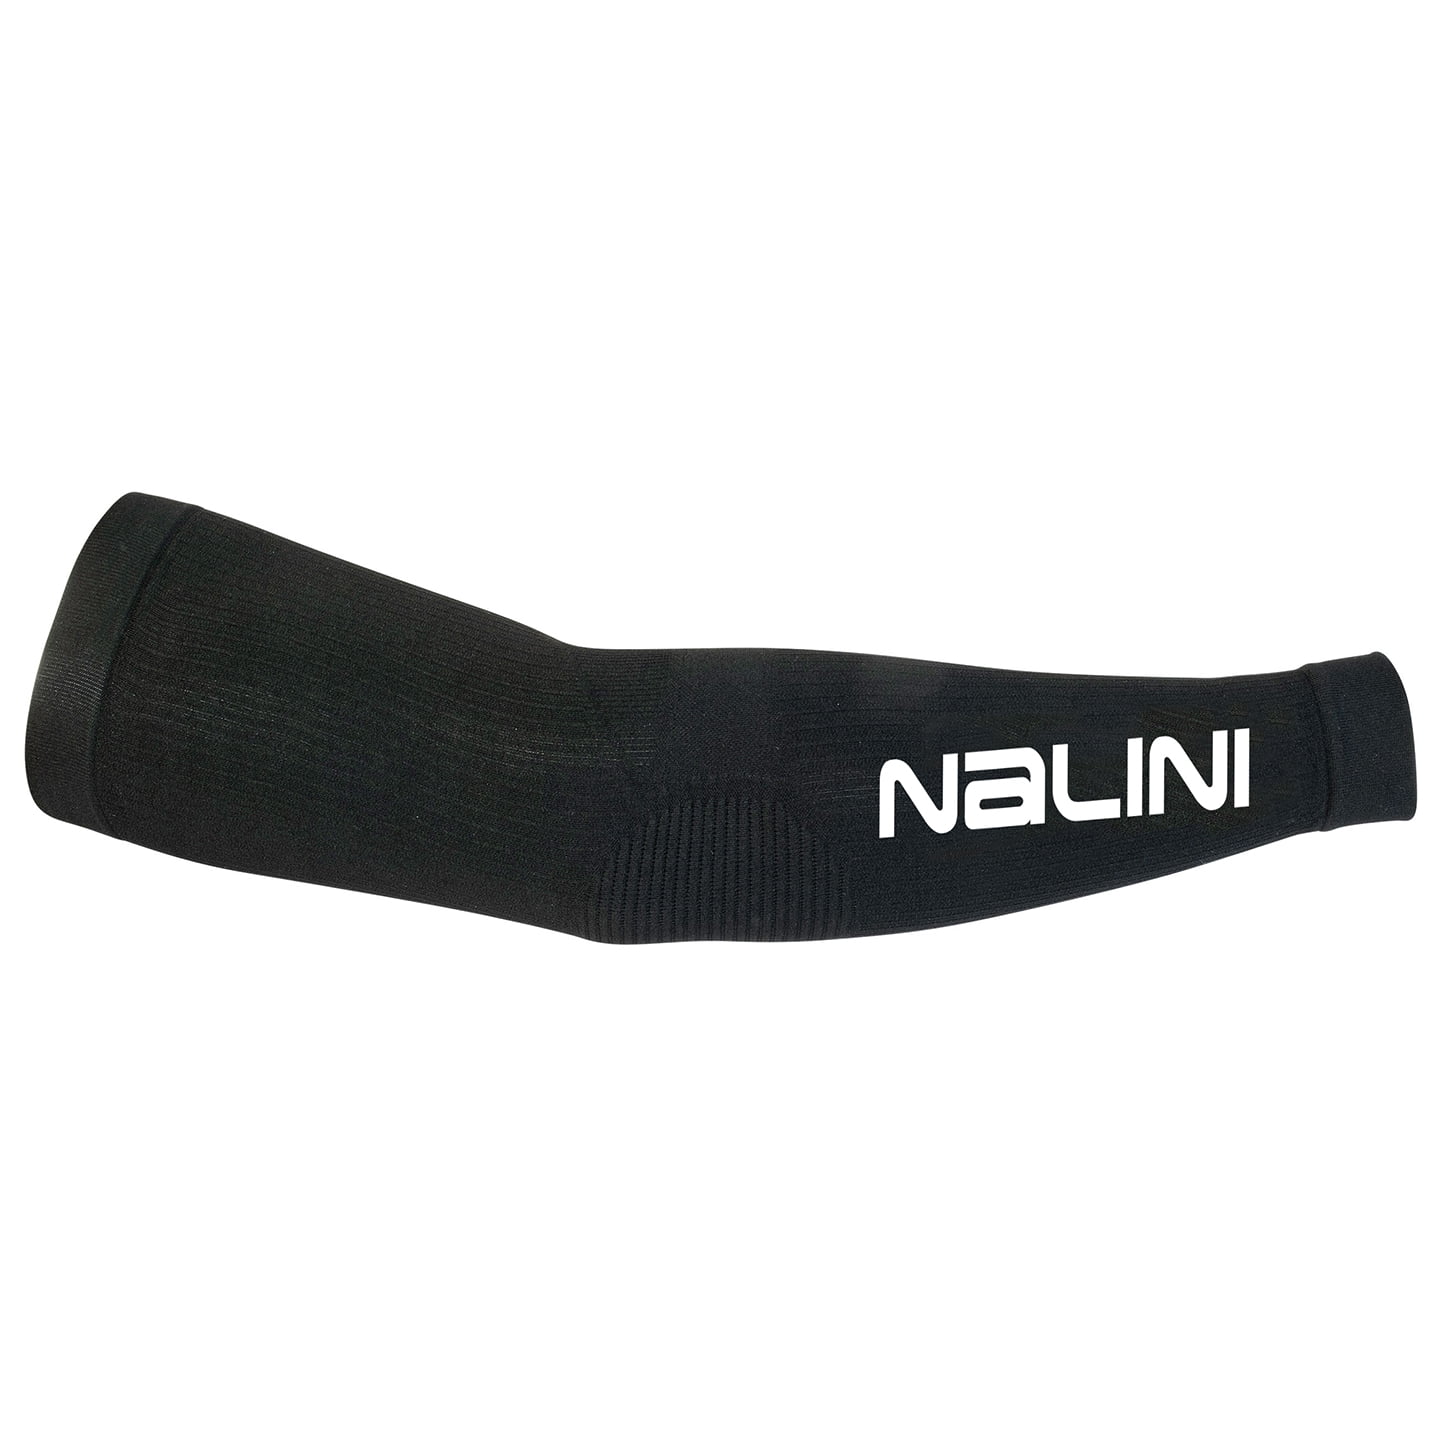 NALINI Seamless Arm Warmers, for men, size L-XL, Cycling clothing